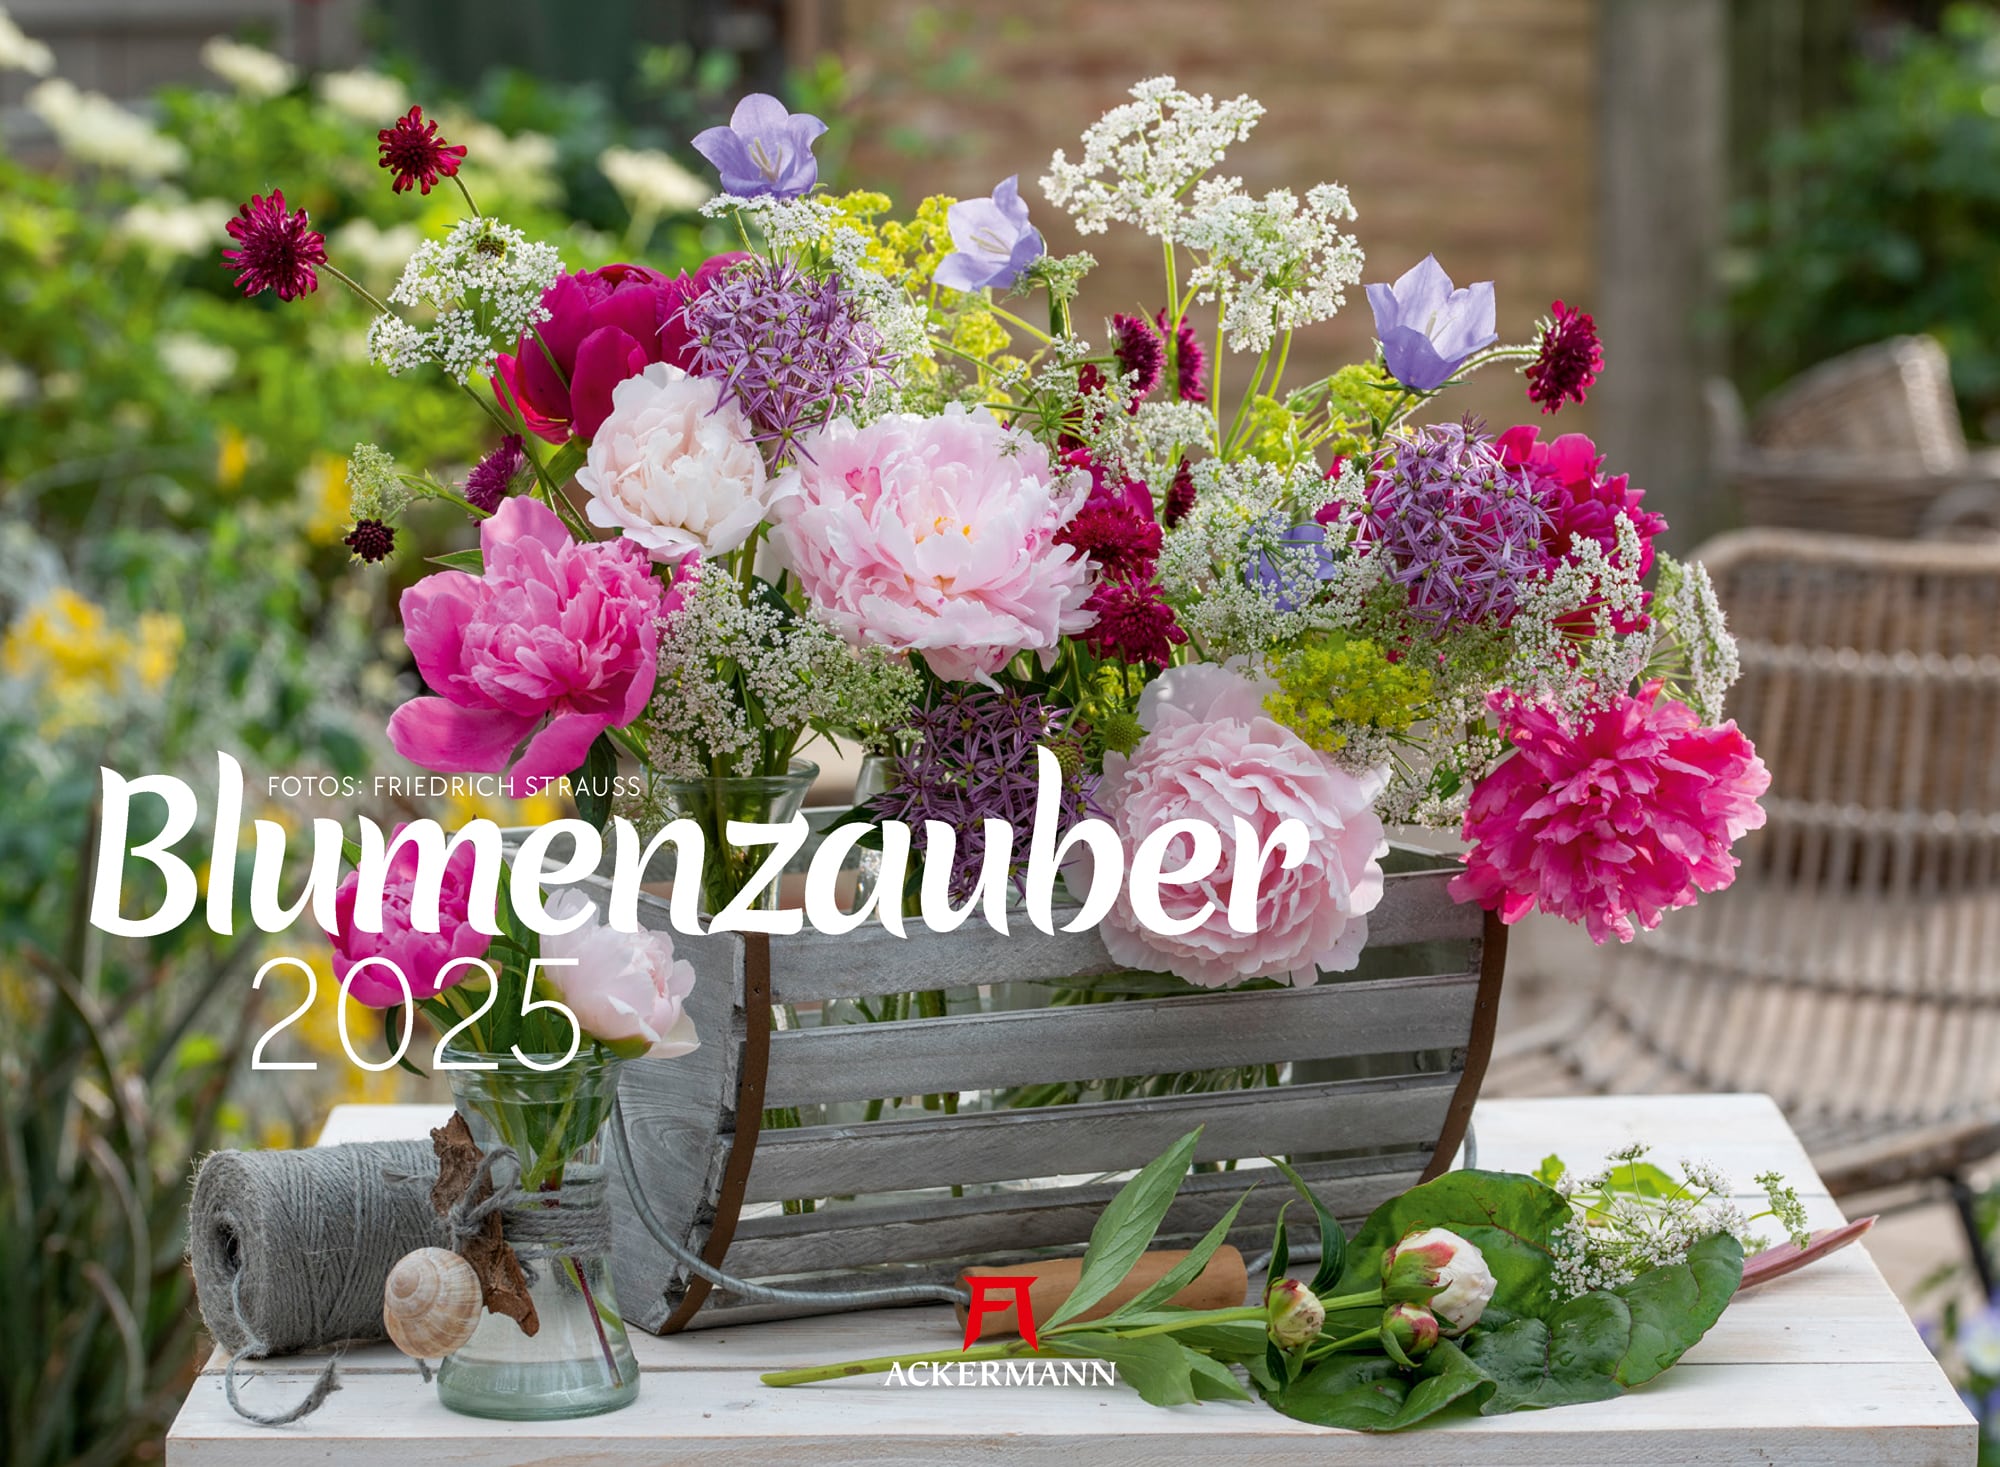 Ackermann Calendar Beauty of Flowers 2025 - Cover Page